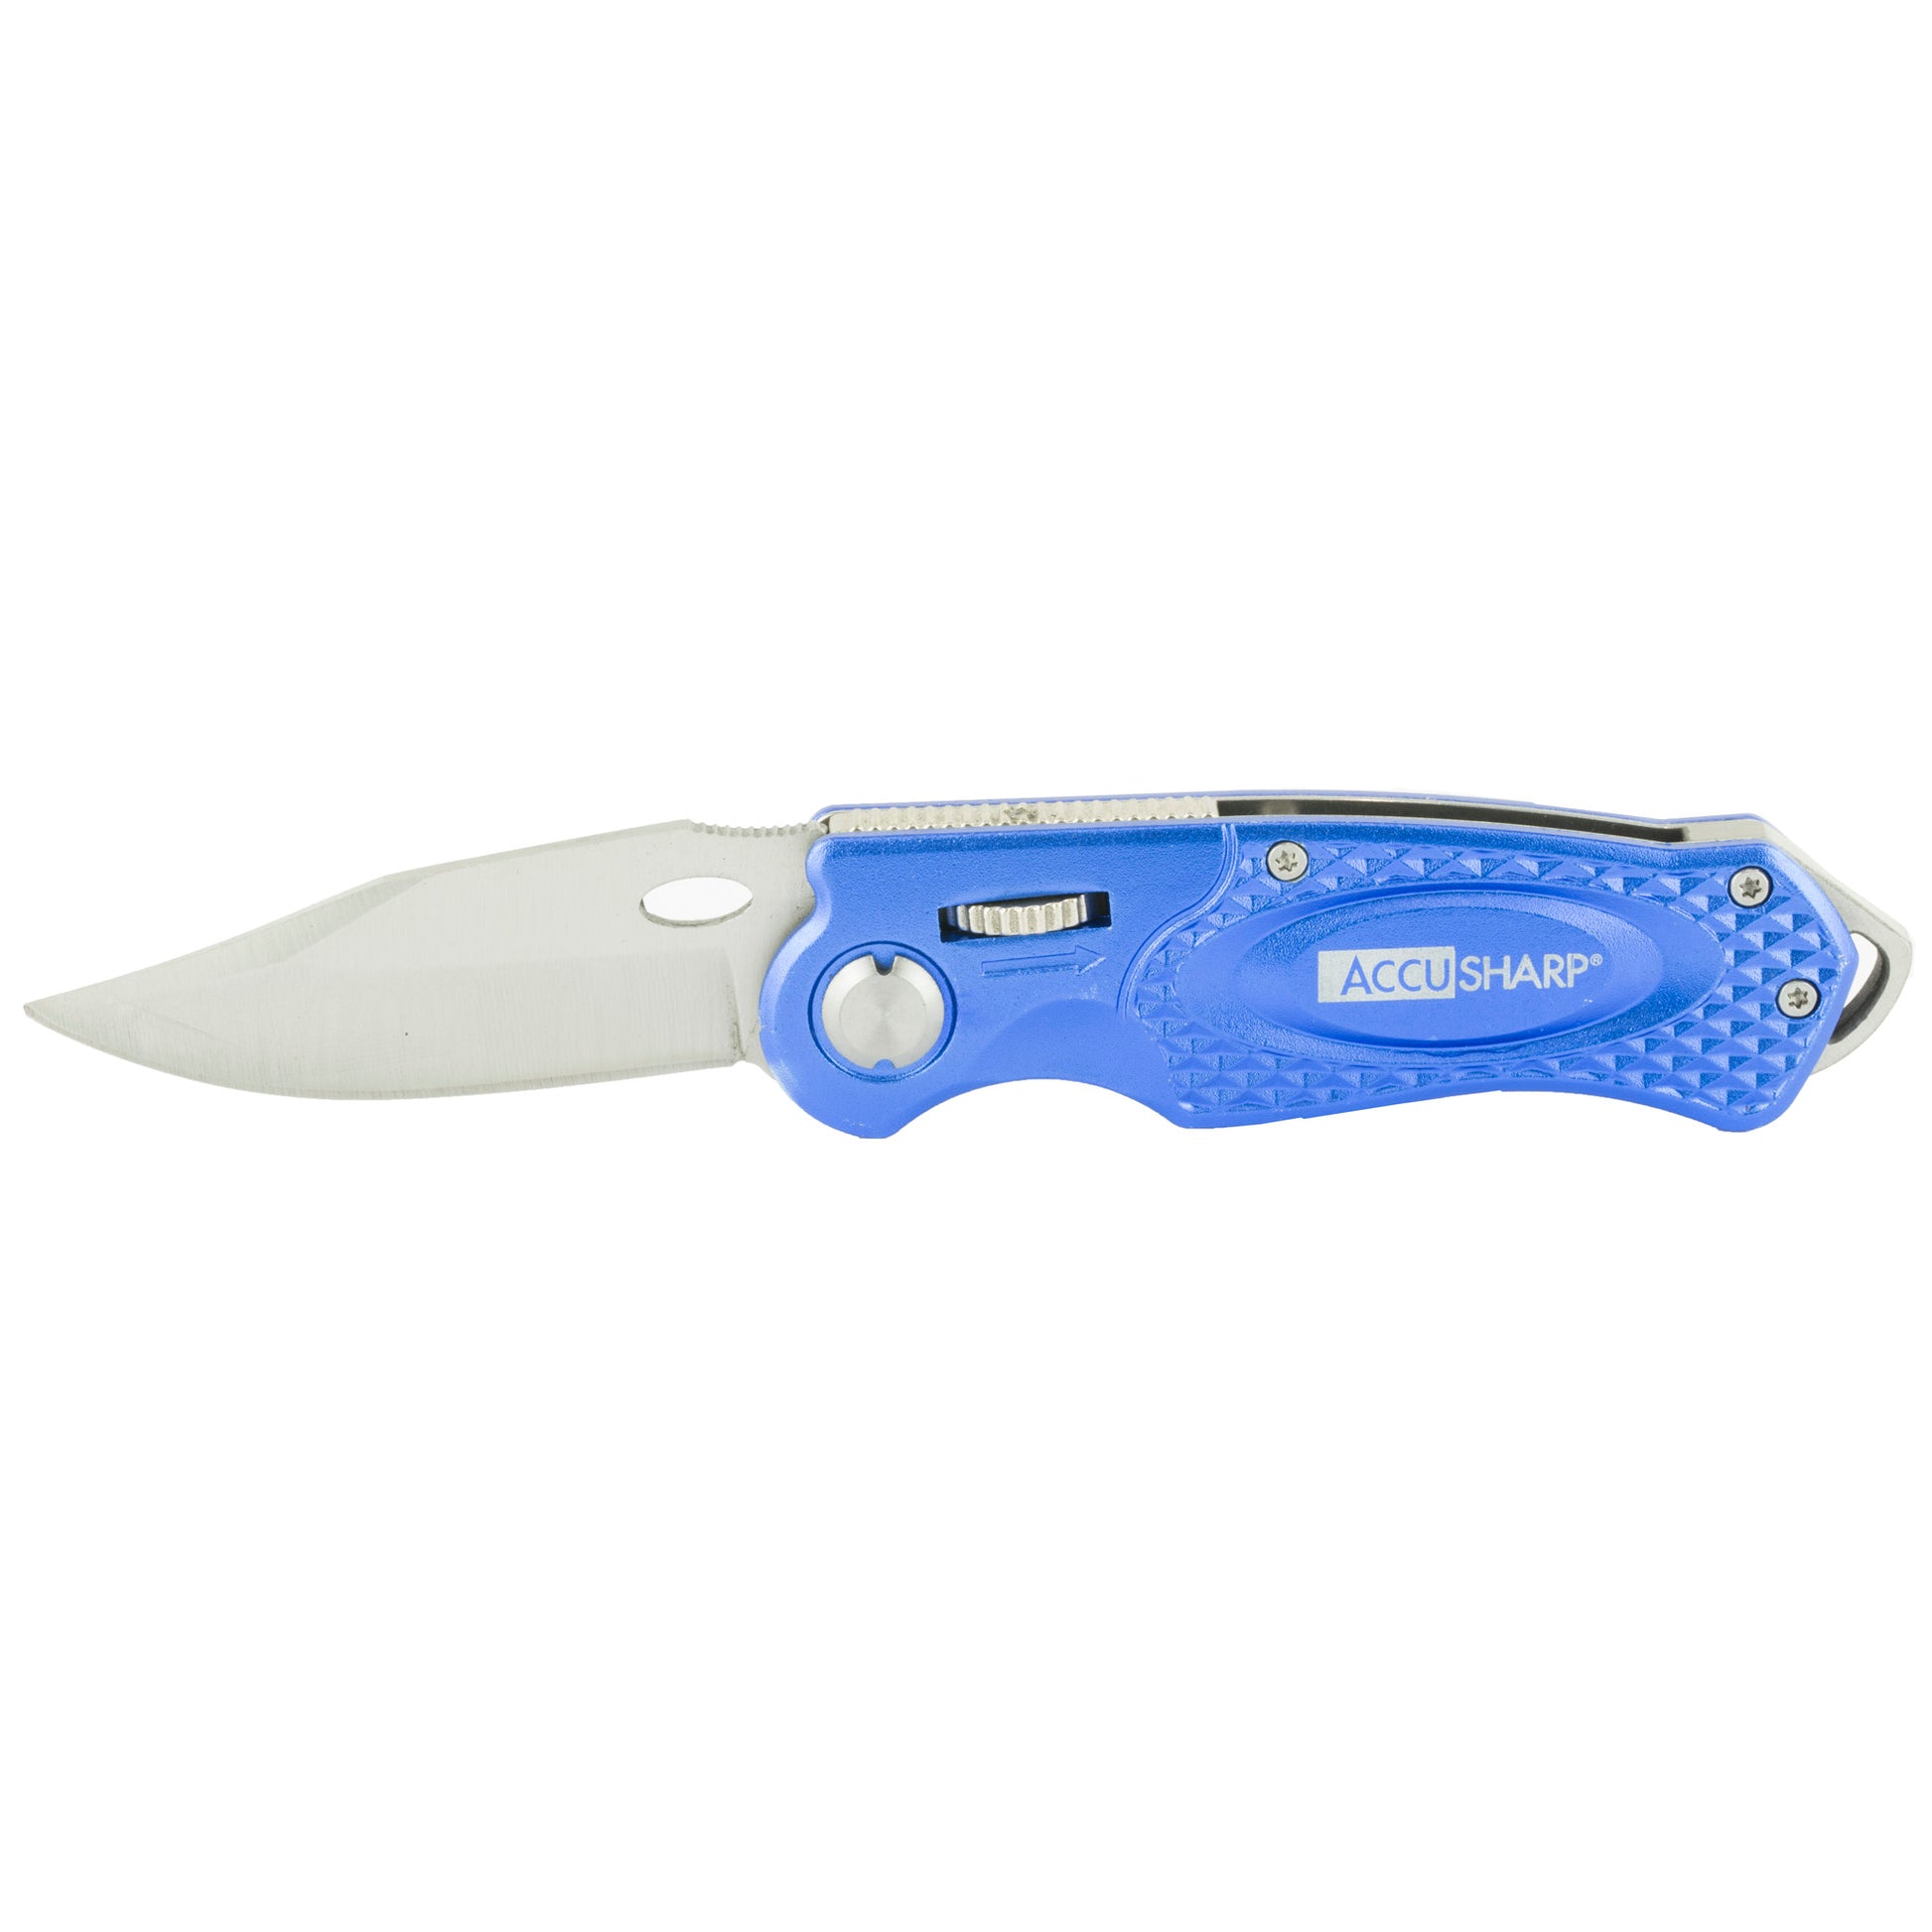 AccuSharp Sport Folding Knife nodized aluminum and stainless steel Blue 701C - California Shooting Supplies